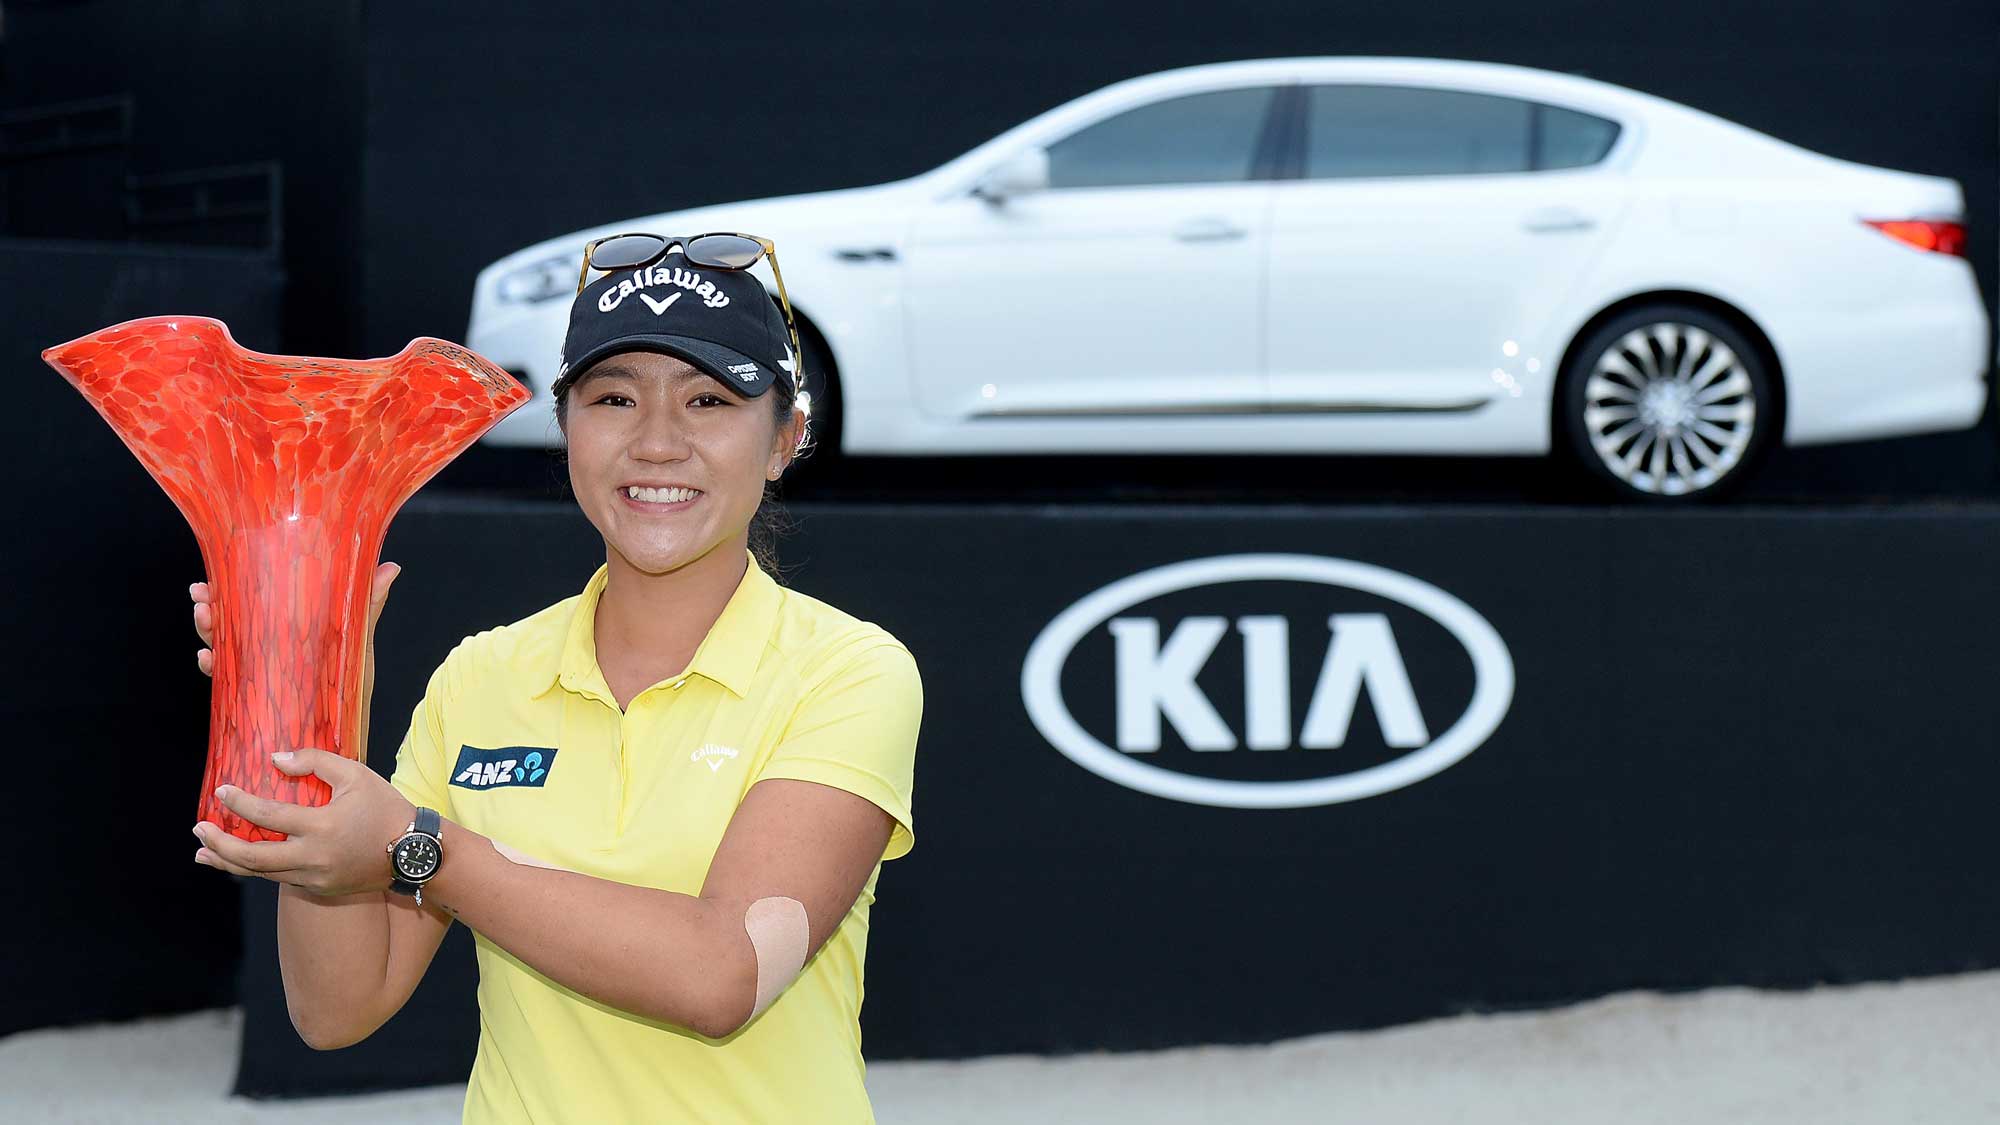  Lydia Ko of New Zealand holds the winners trophy after her -19 under victory during the Final Round of the KIA Classic